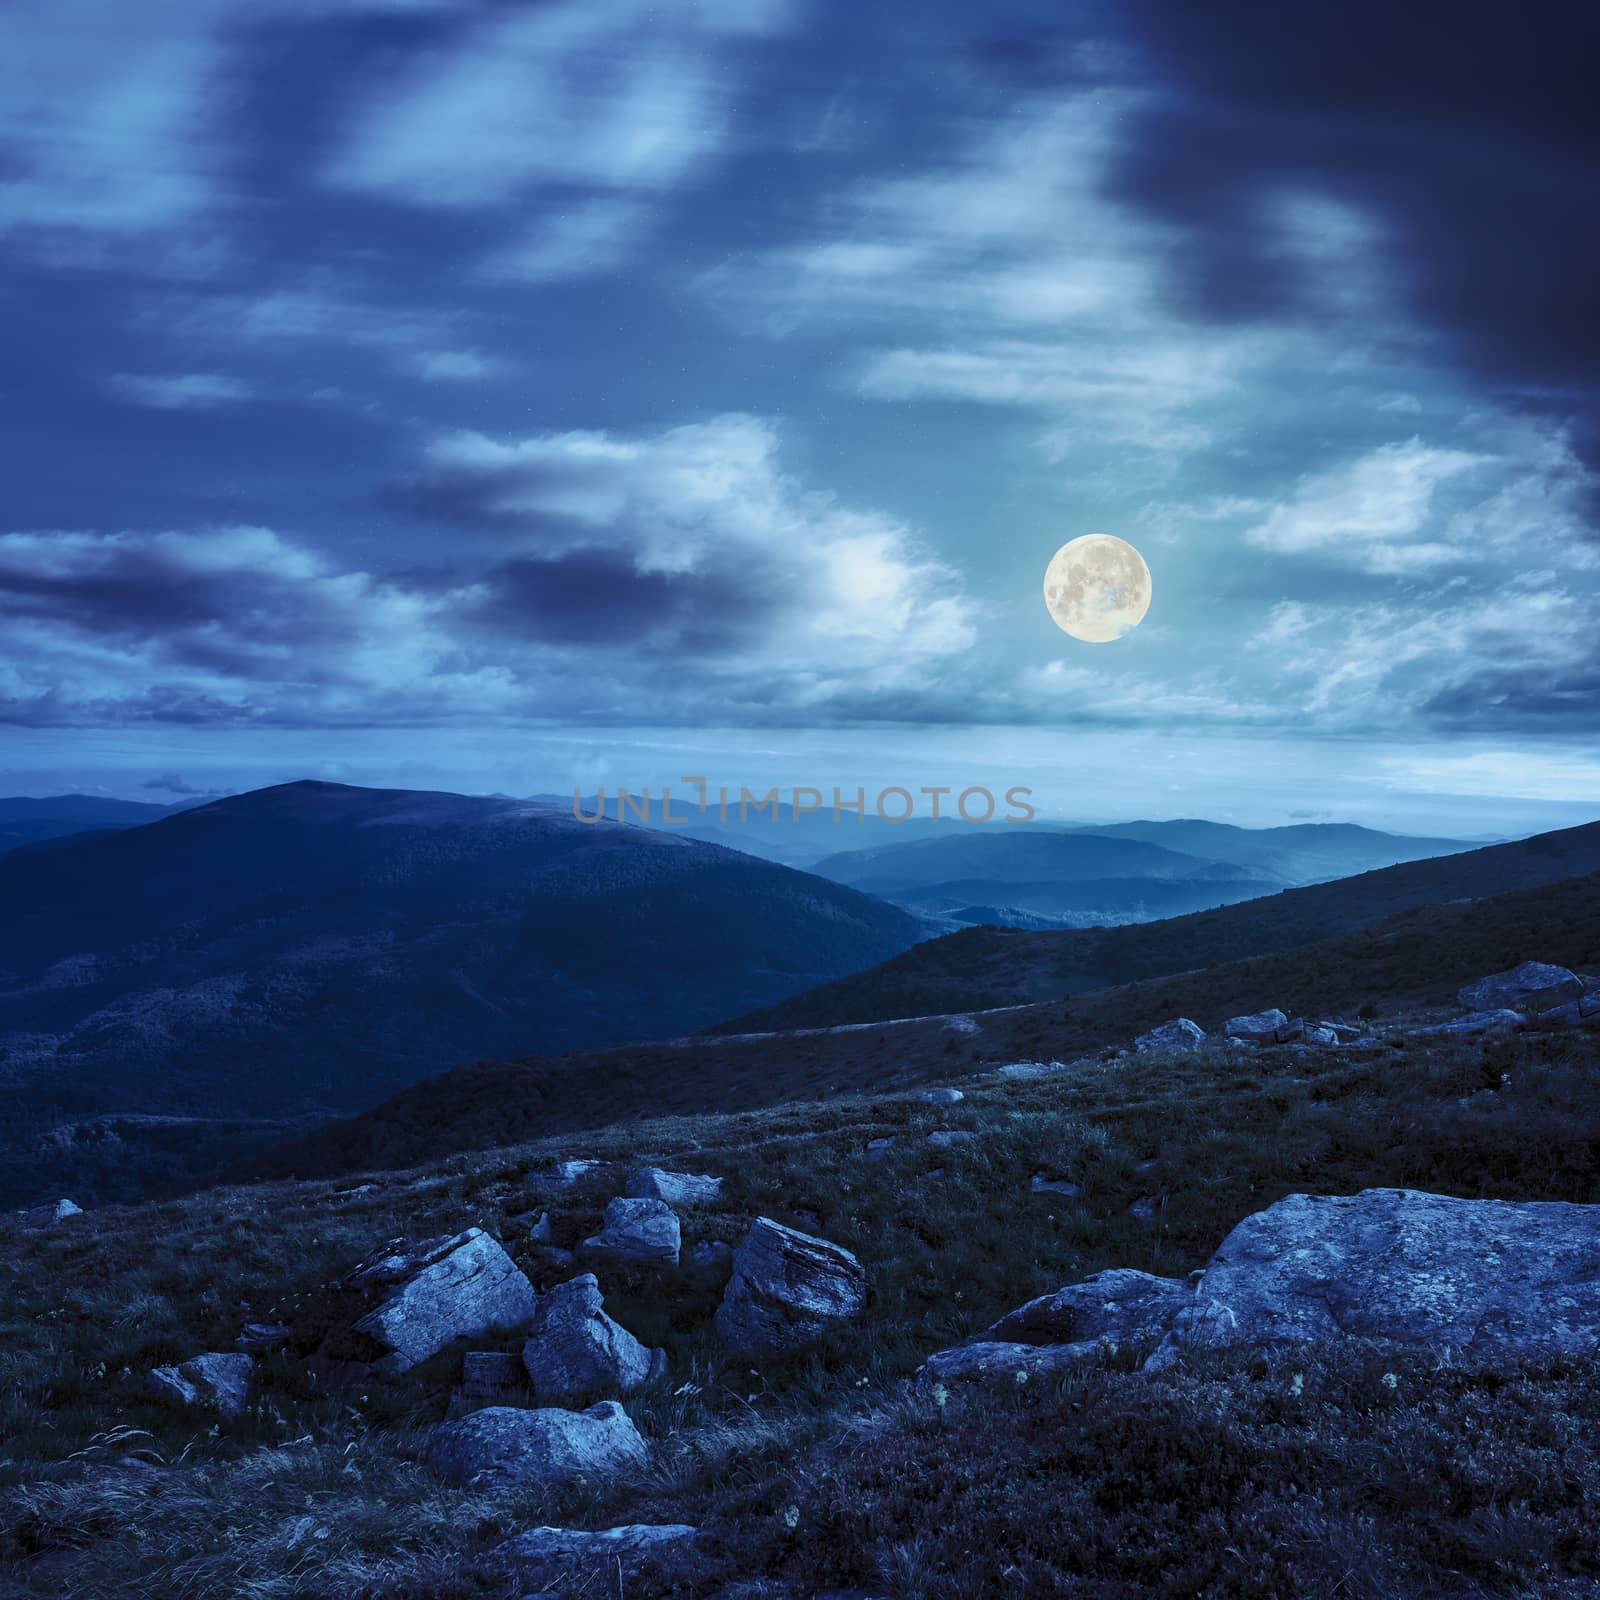 mountain hillside with white boulders at night by Pellinni